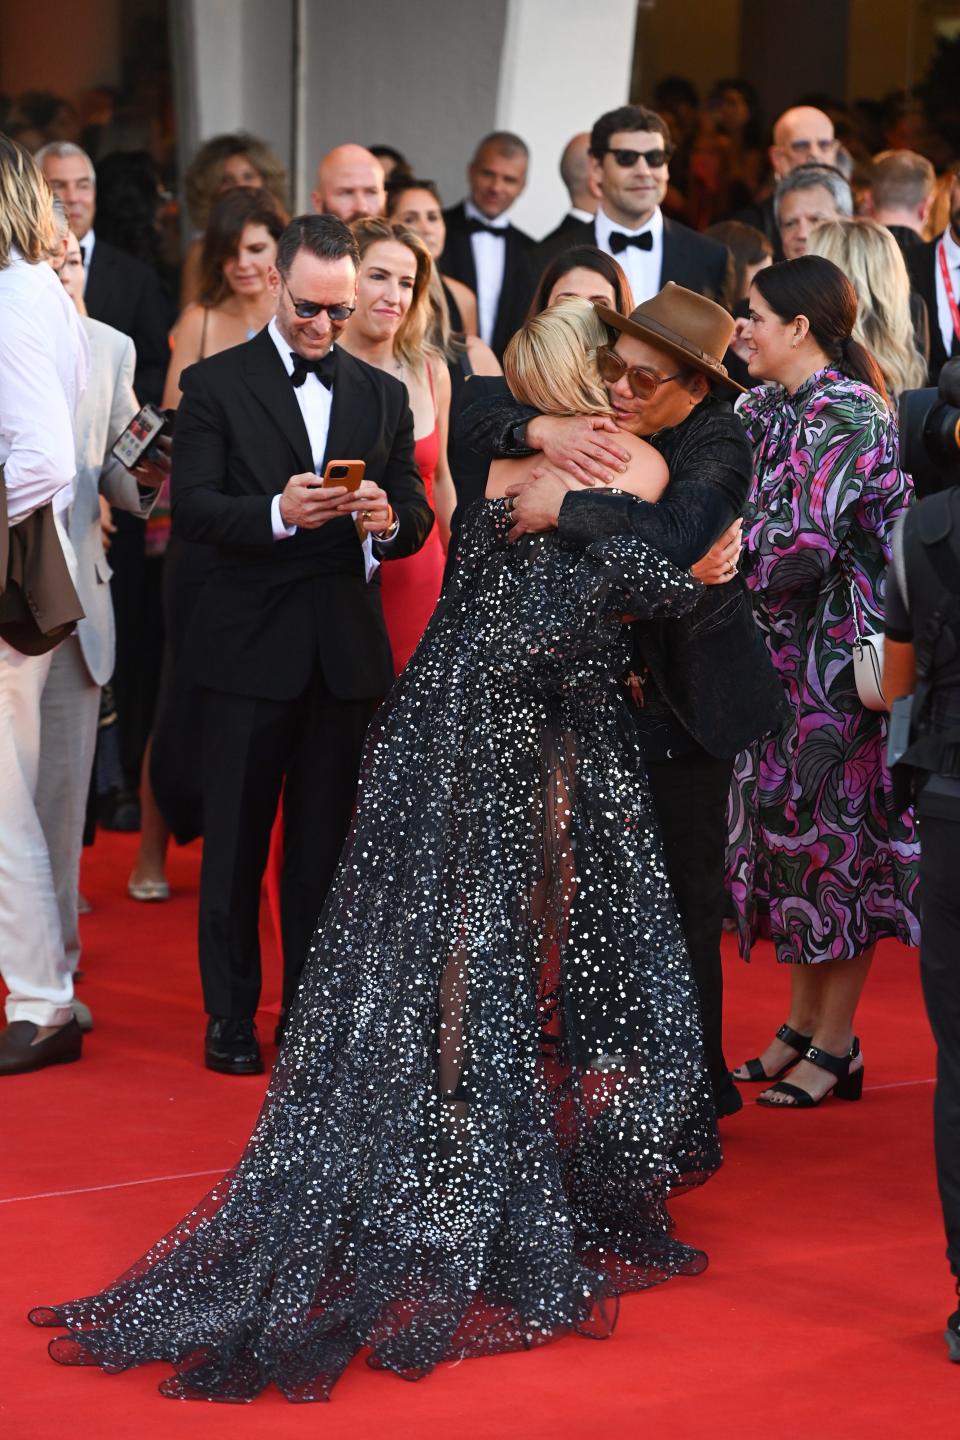 Florence Pugh greets Matthew Libatique on the "Don't Worry Darling" red carpet at the 2022 Venice Film Festival.